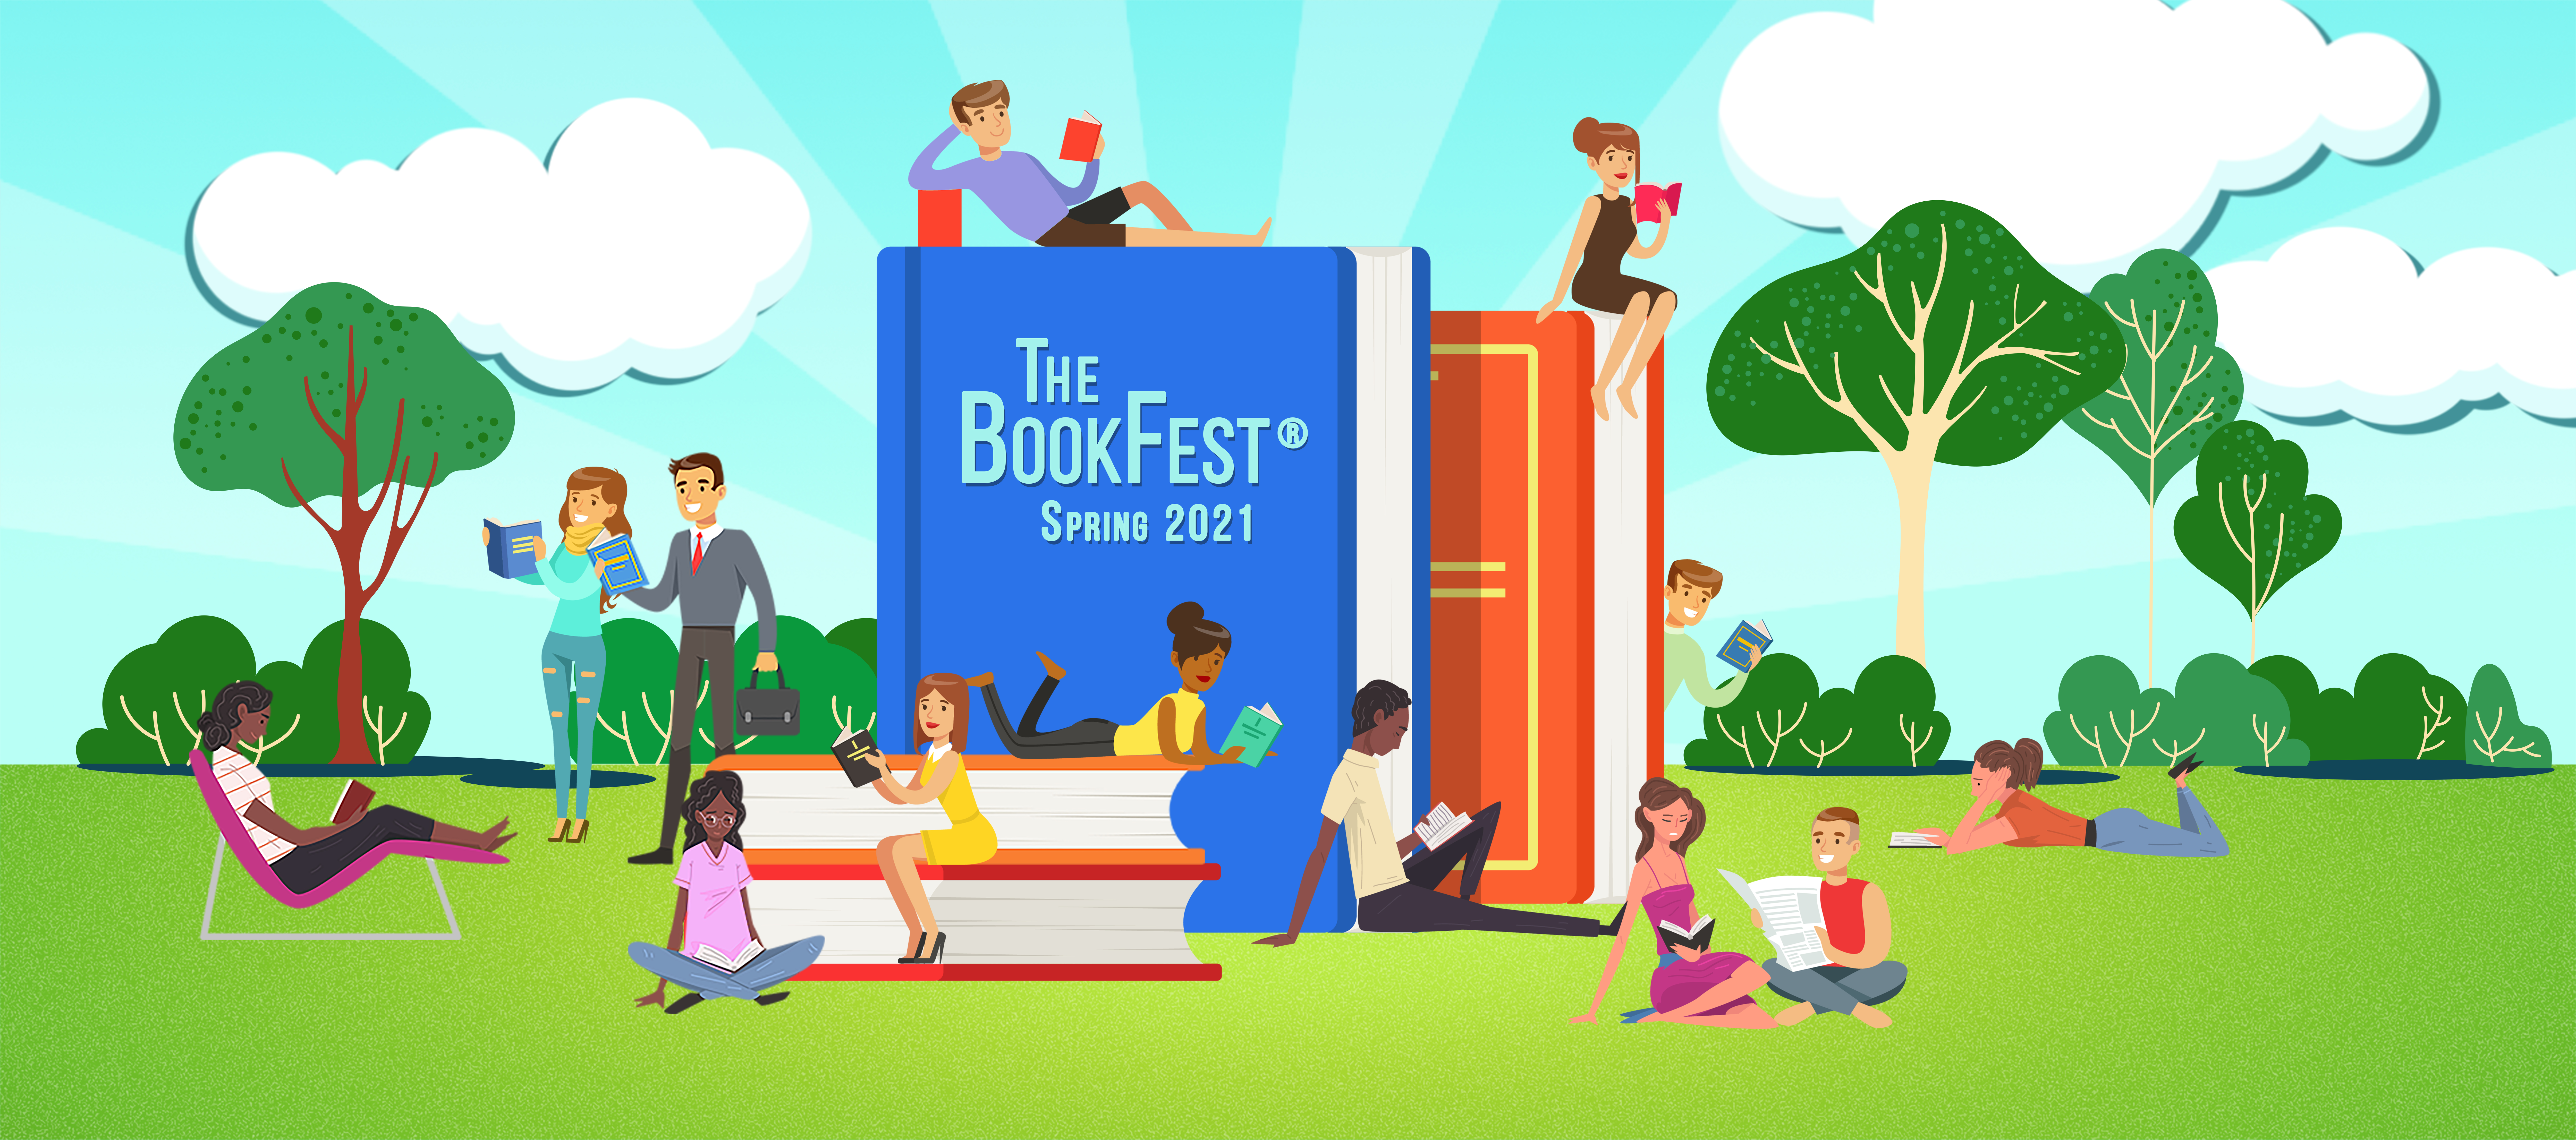 The BookFest: Spring 2021